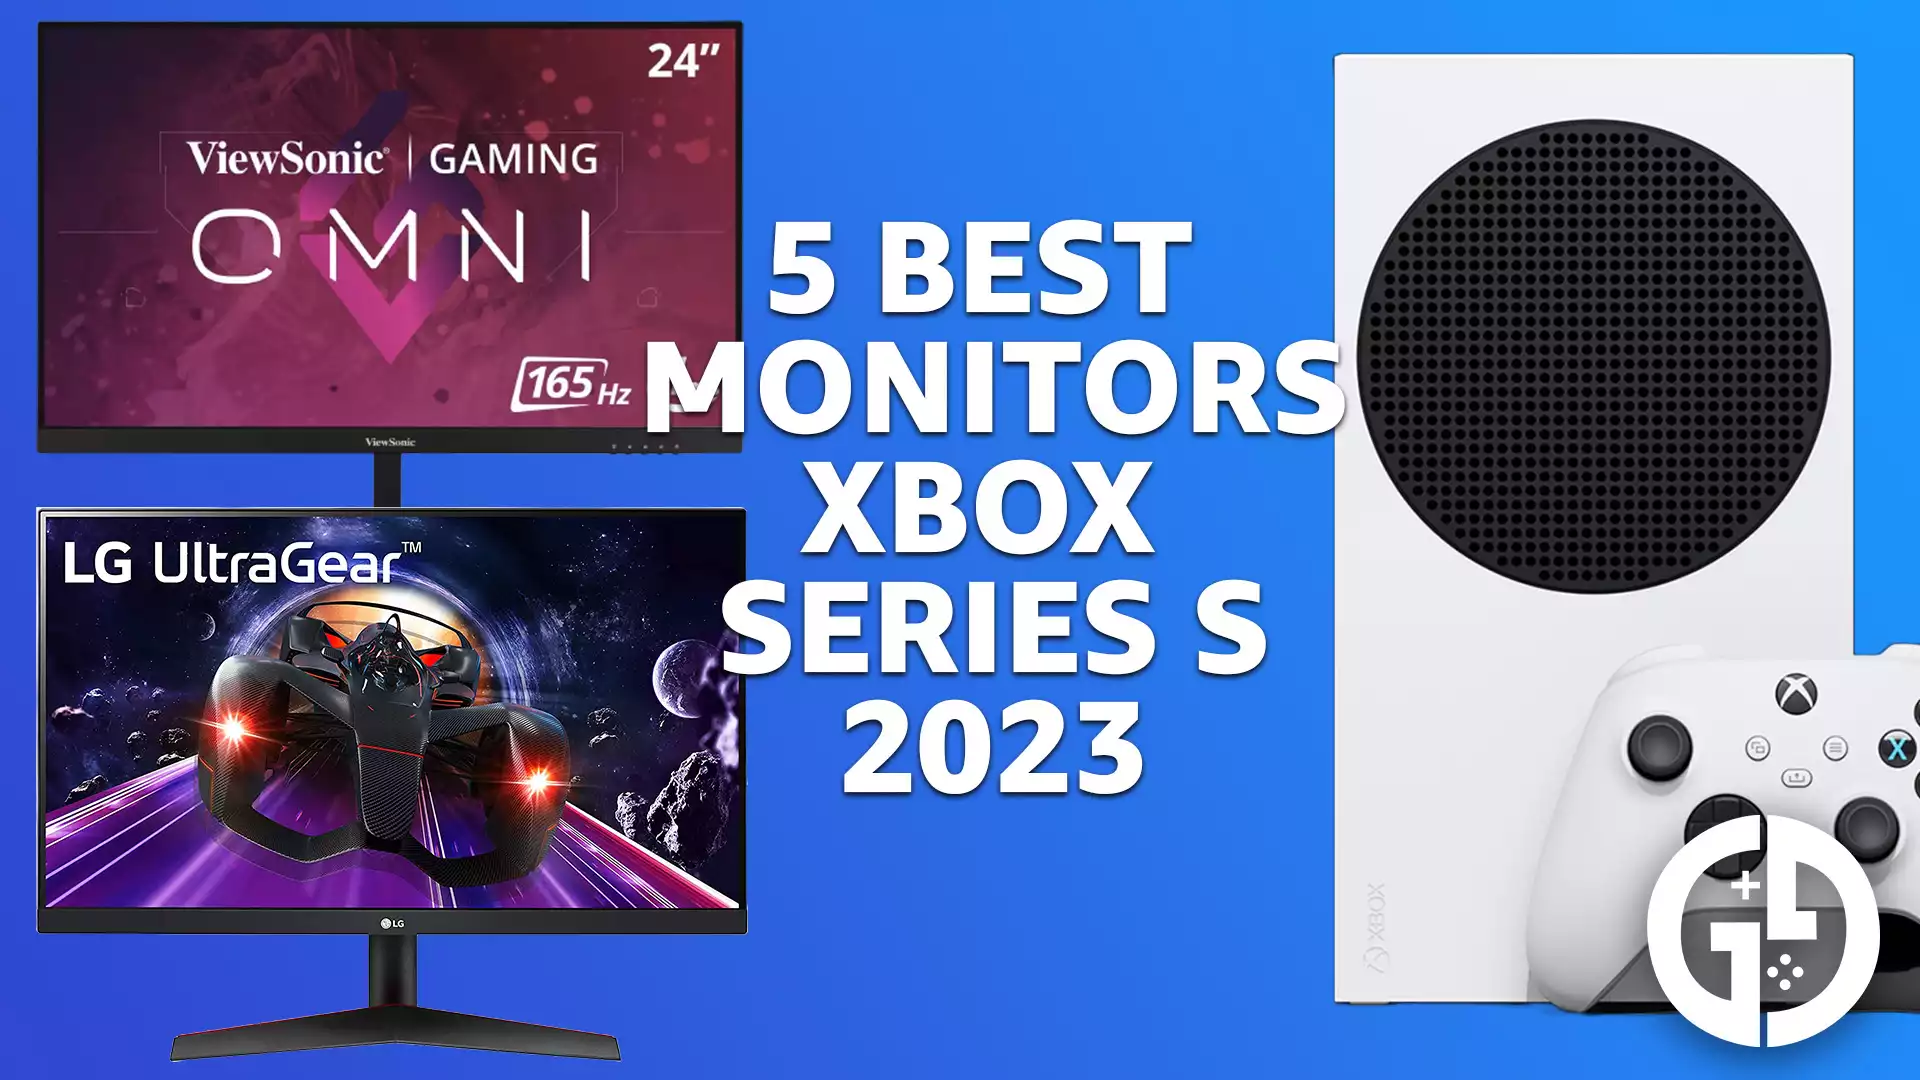 What is the best monitor for Xbox Series X and Xbox Series S?